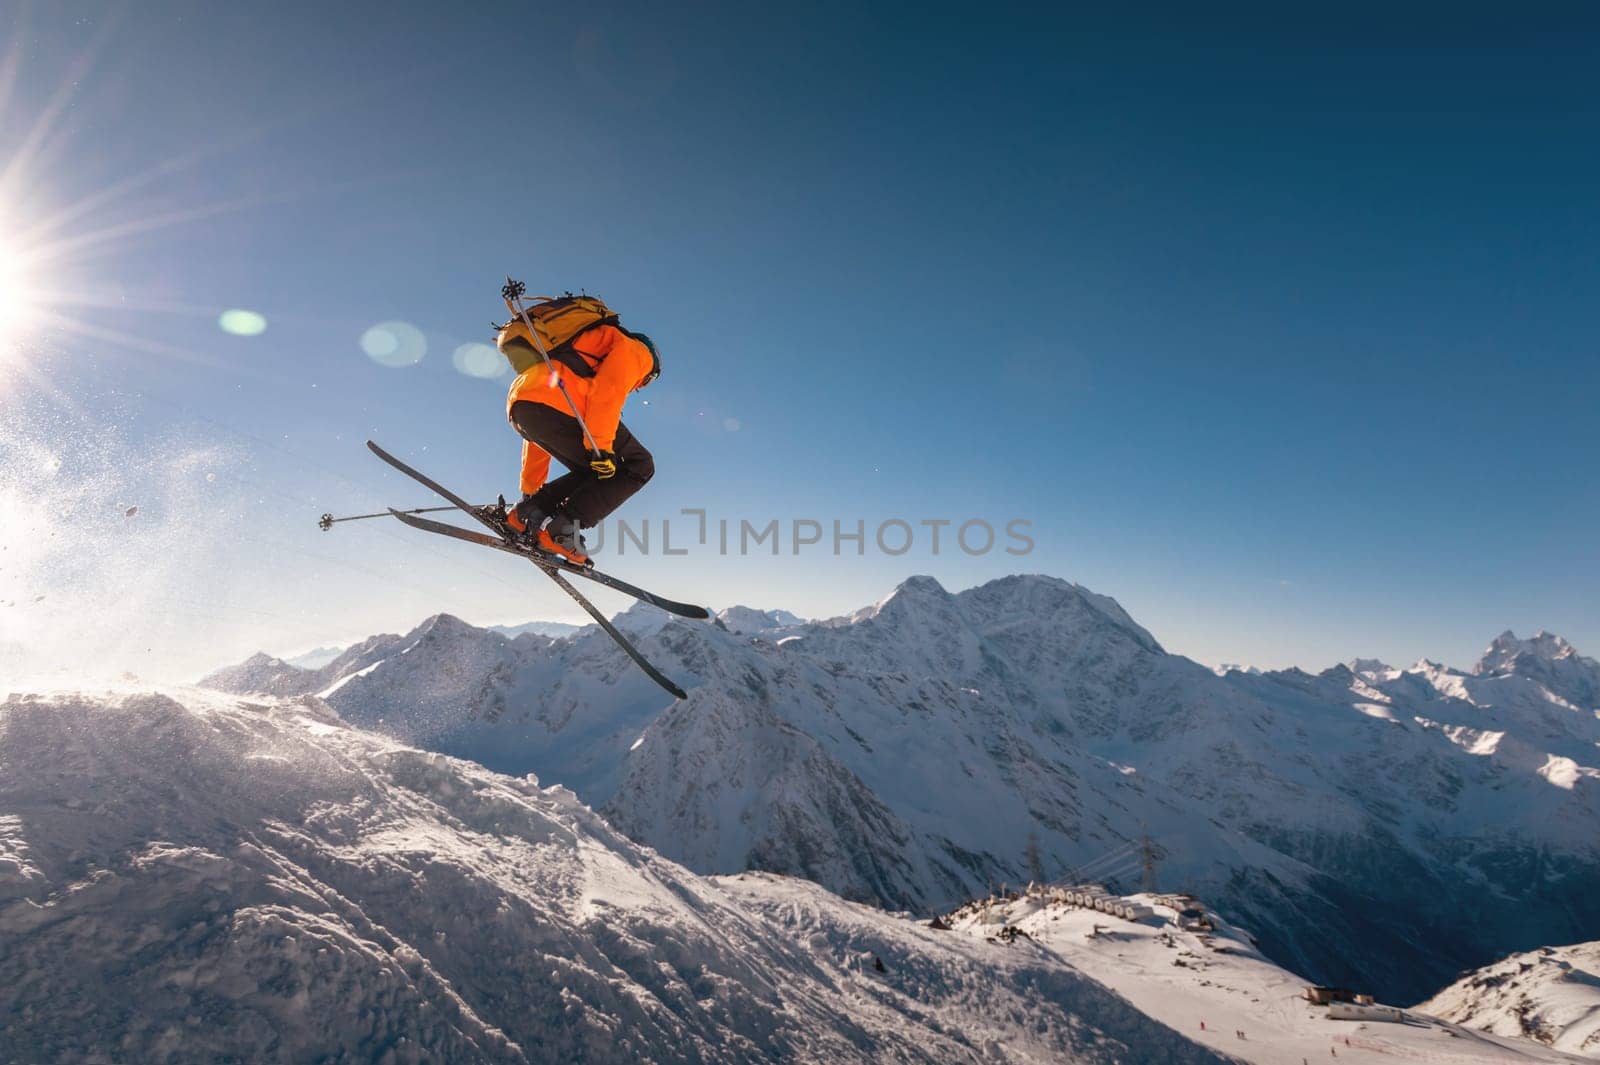 winter vacation at the ski resort. skier quickly fly in the air doing a stunt heli-skiing on the background of snow-capped mountains.